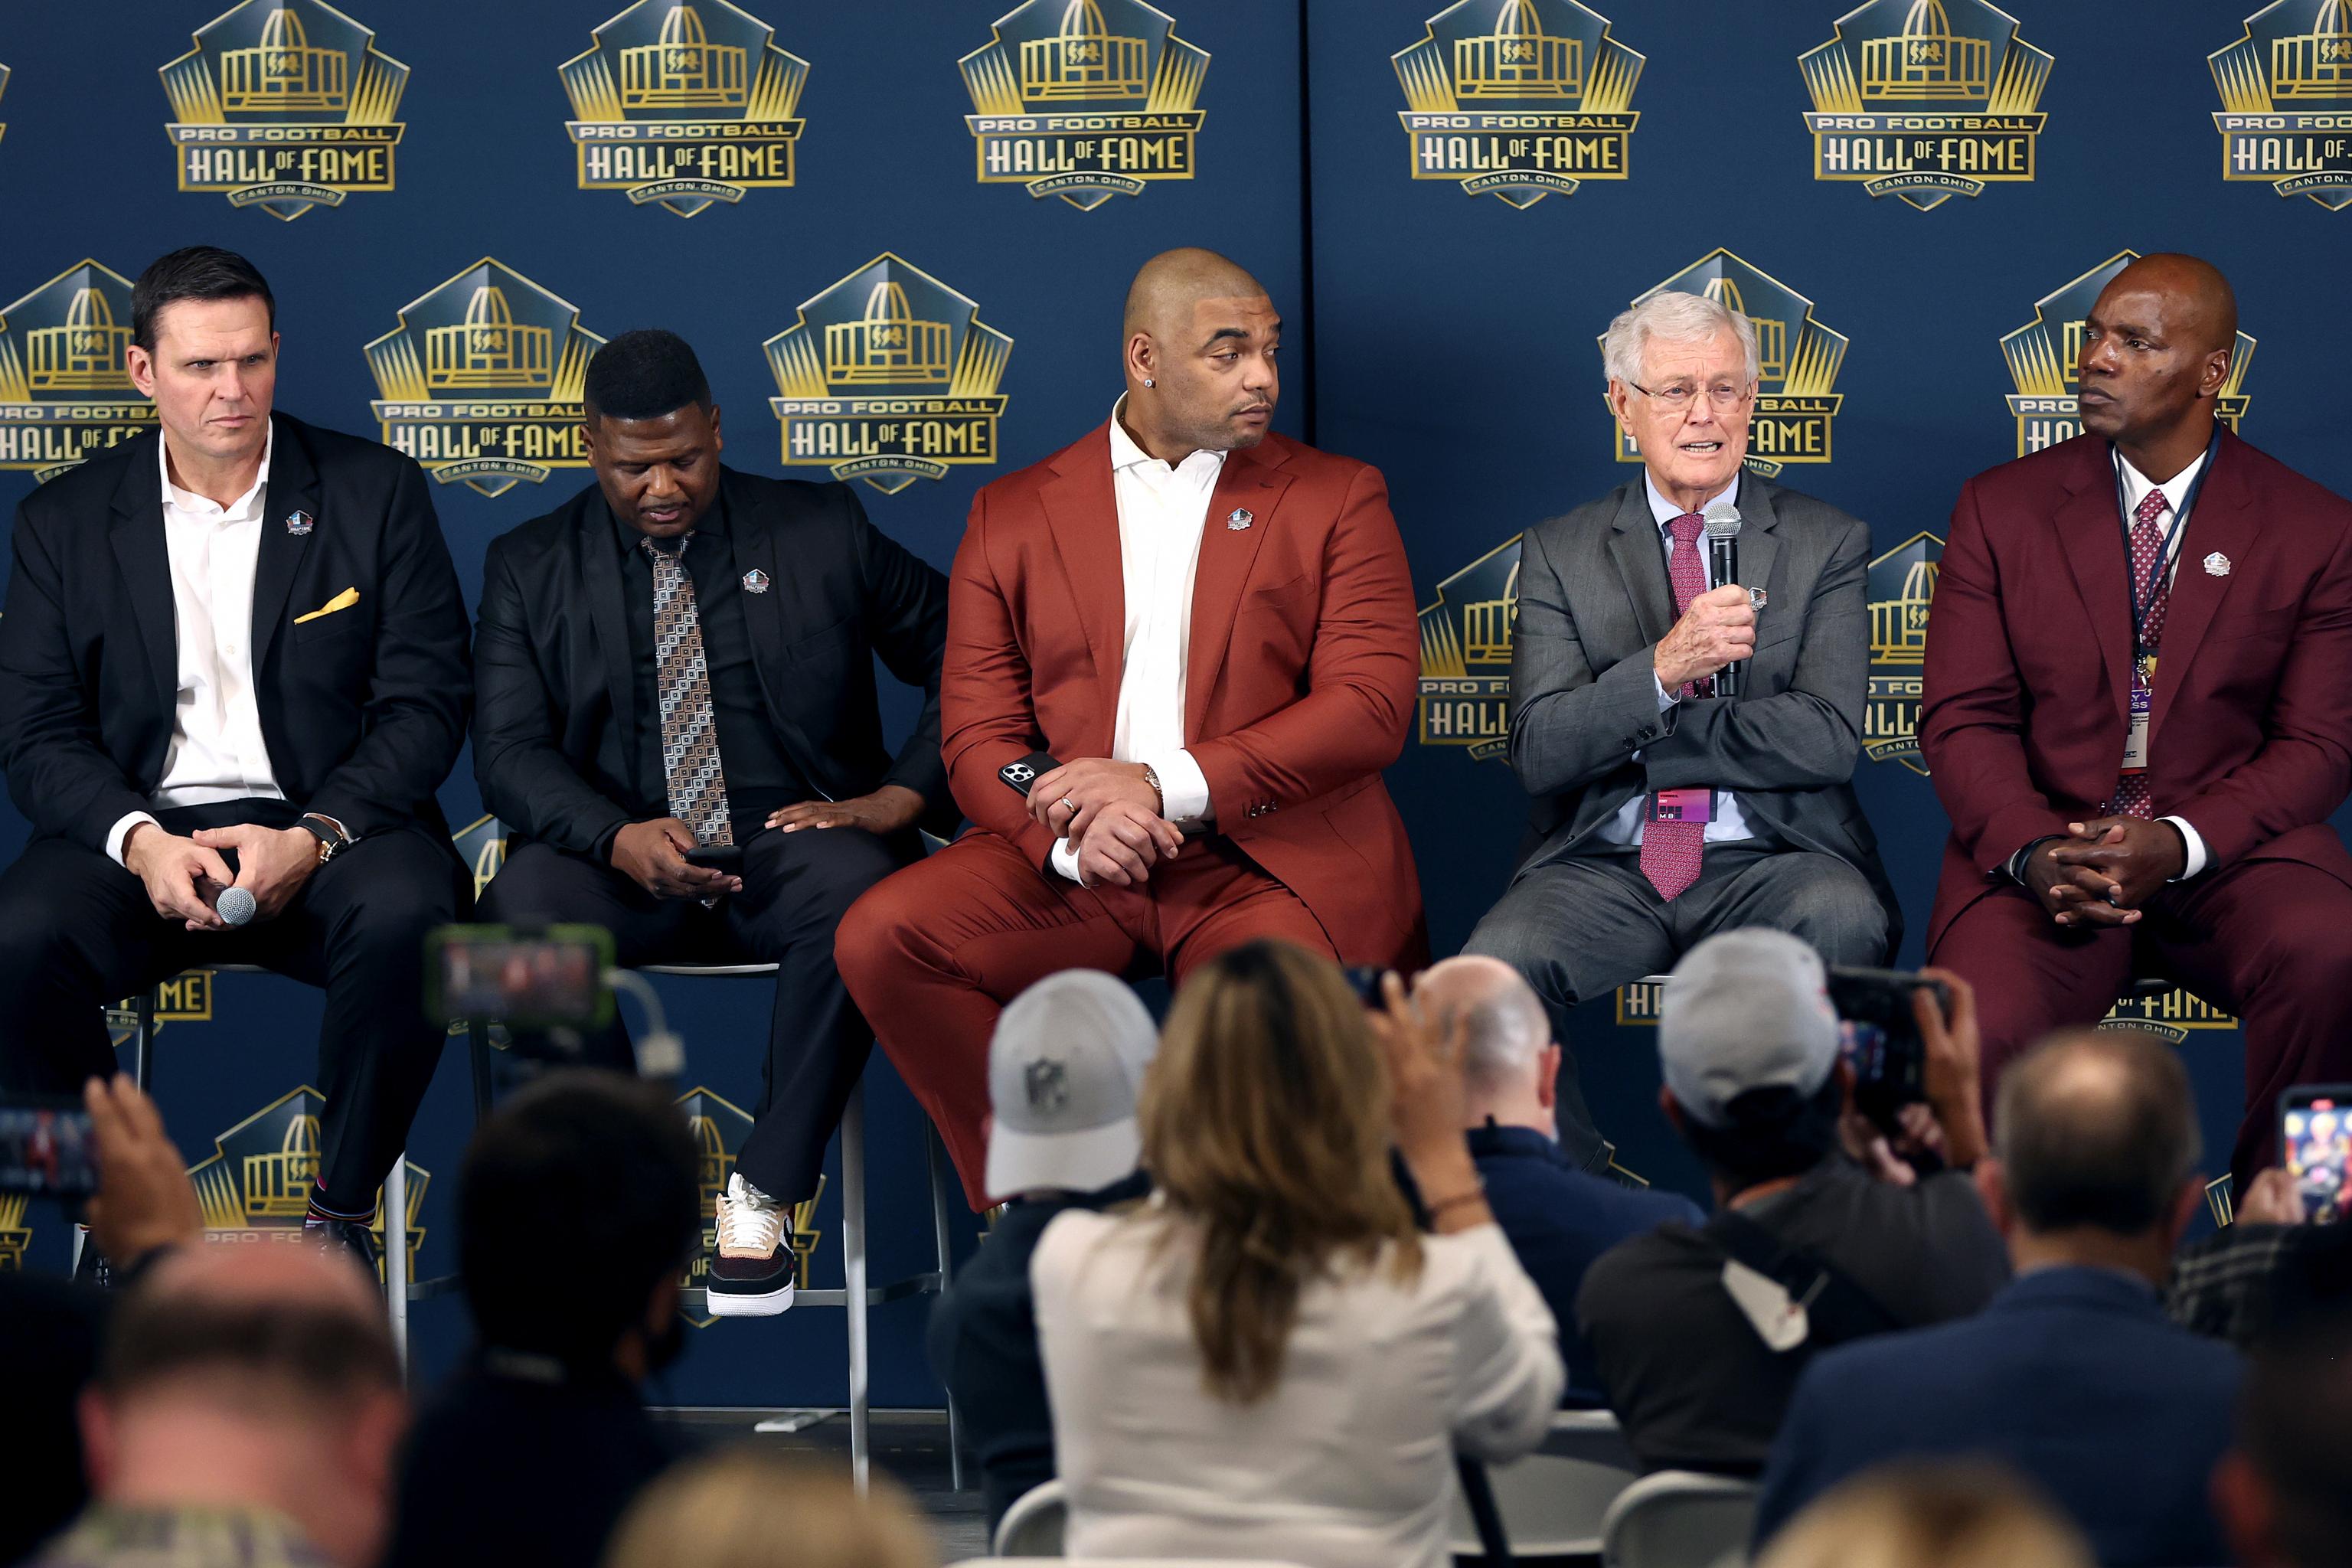 nfl hall of fame game 2022 inductees